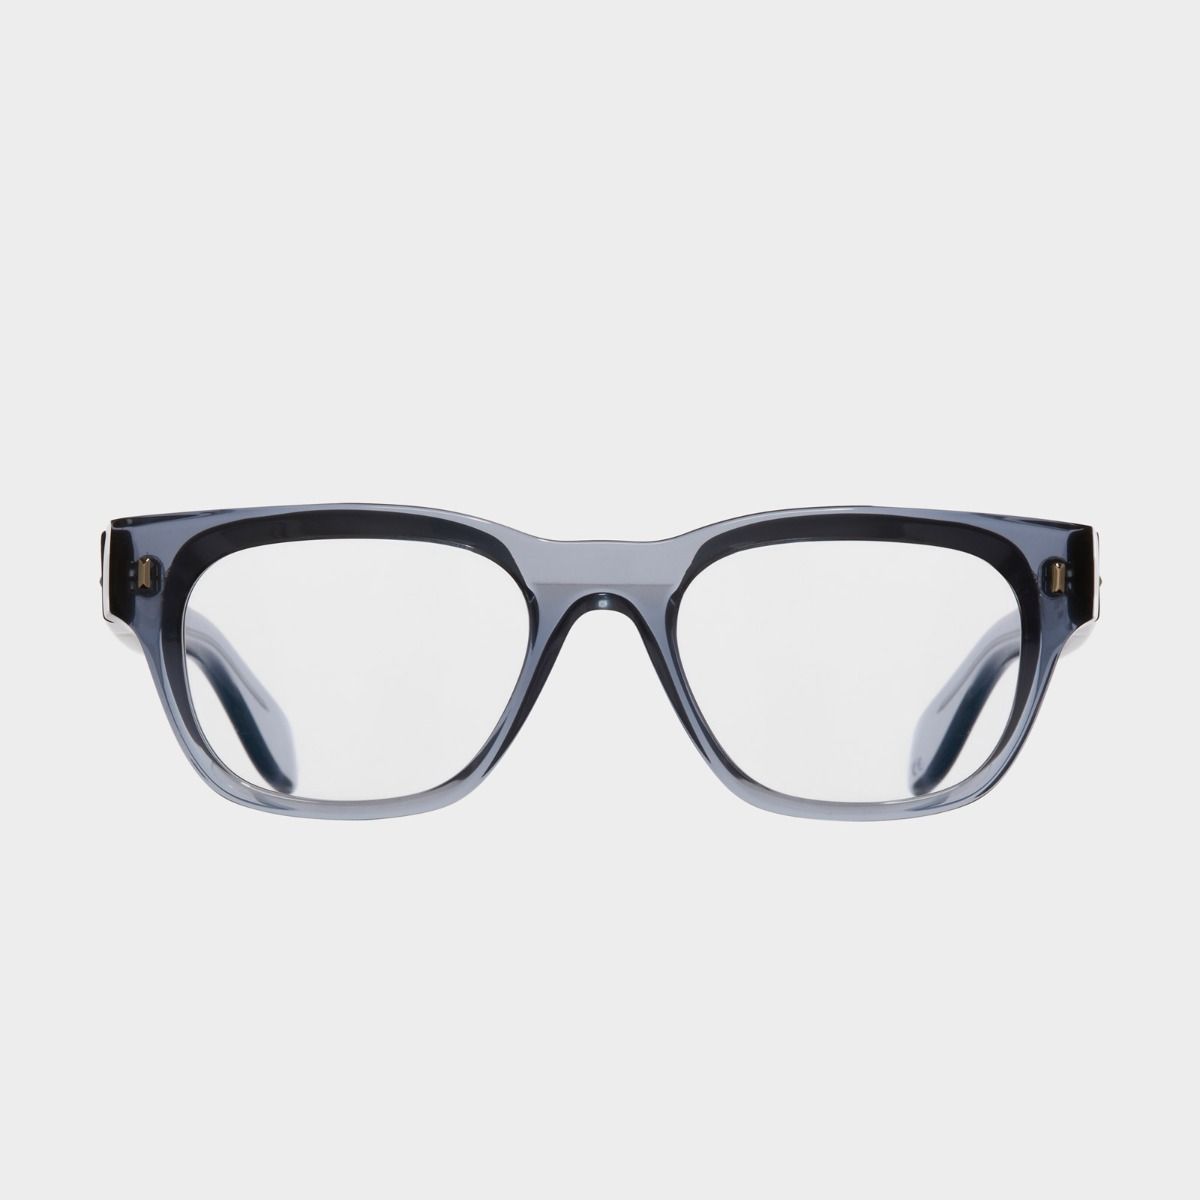 Cutler and Gross, 9772 Optical Square Glasses - Brooklyn Blue